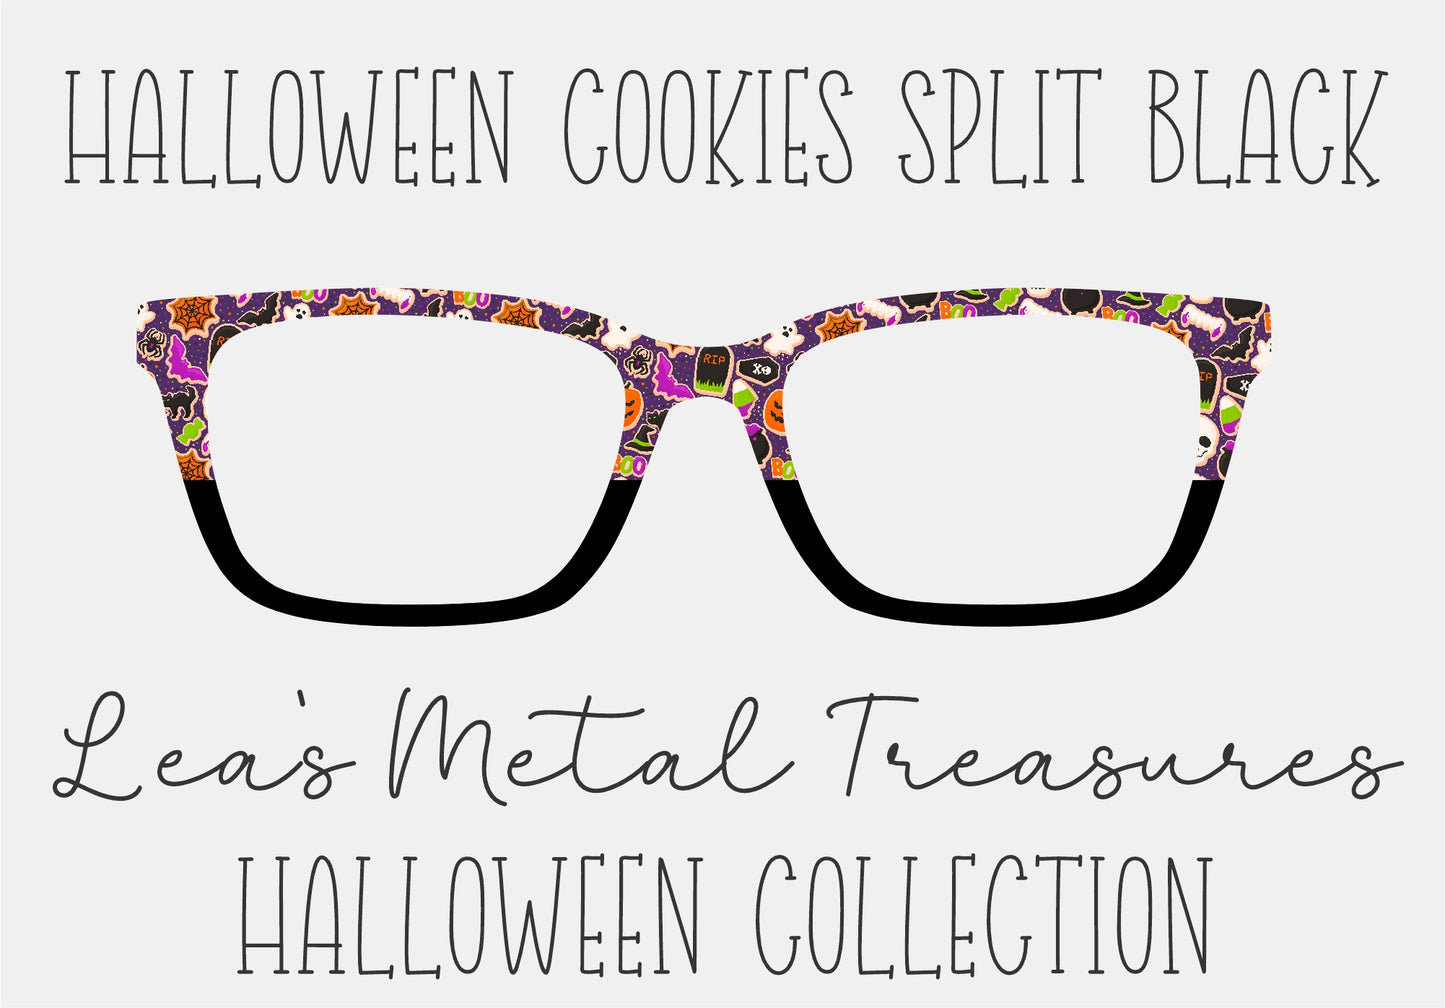 HALLOWEEN COOKIES SPLIT BLACK Eyewear Frame Toppers COMES WITH MAGNETS